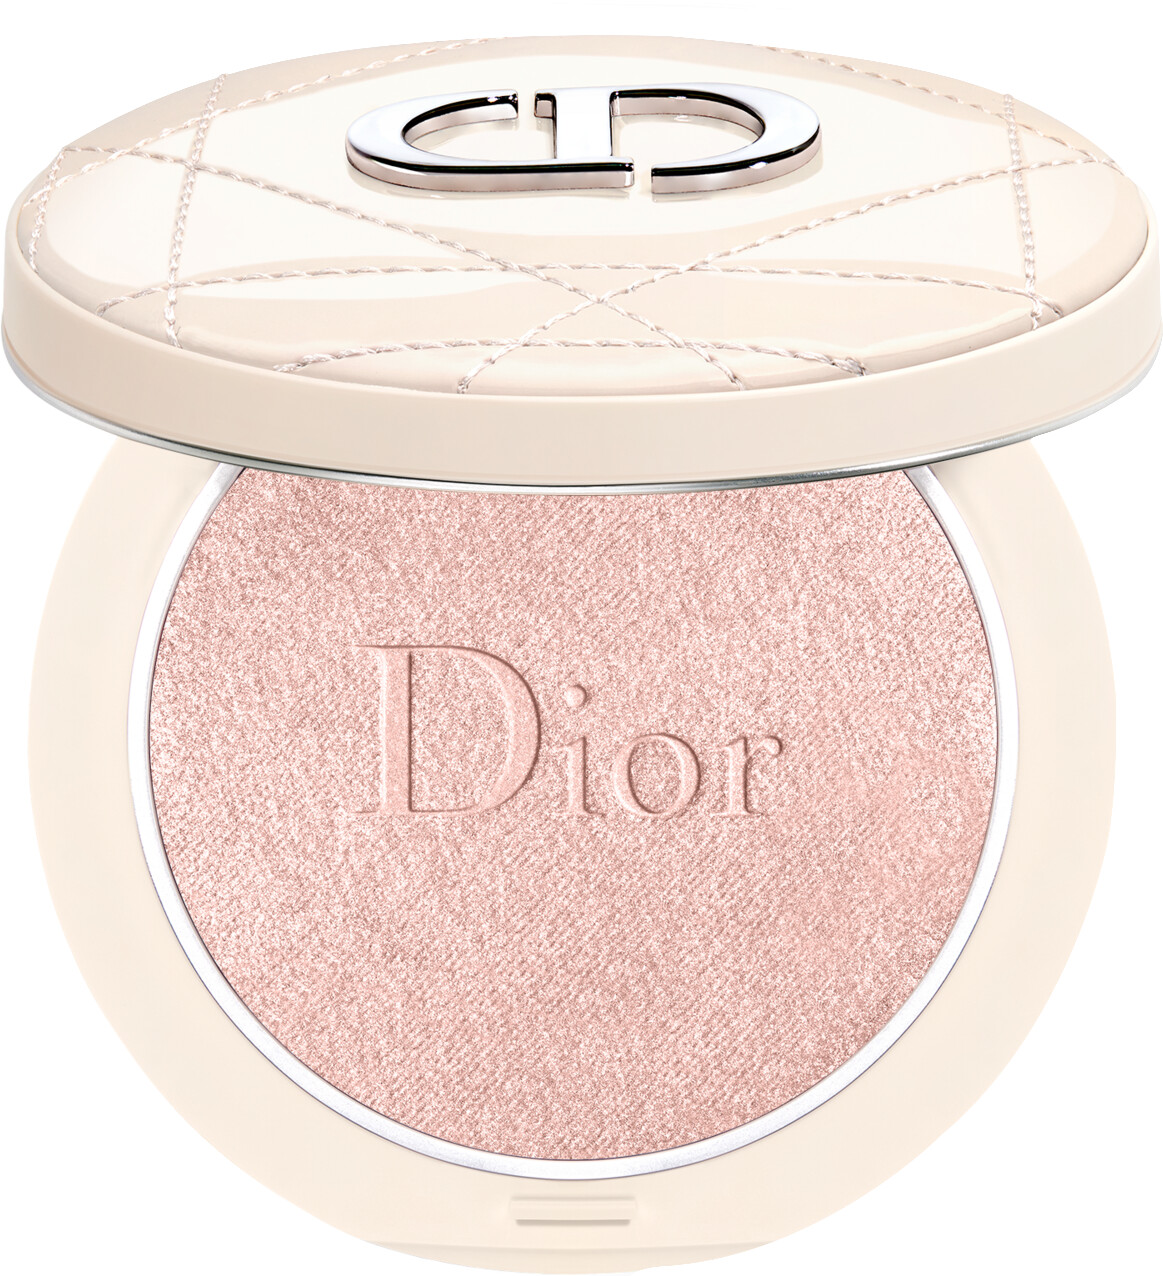 DIOR Forever Couture Luminizer 6g 02 - Pink Glow